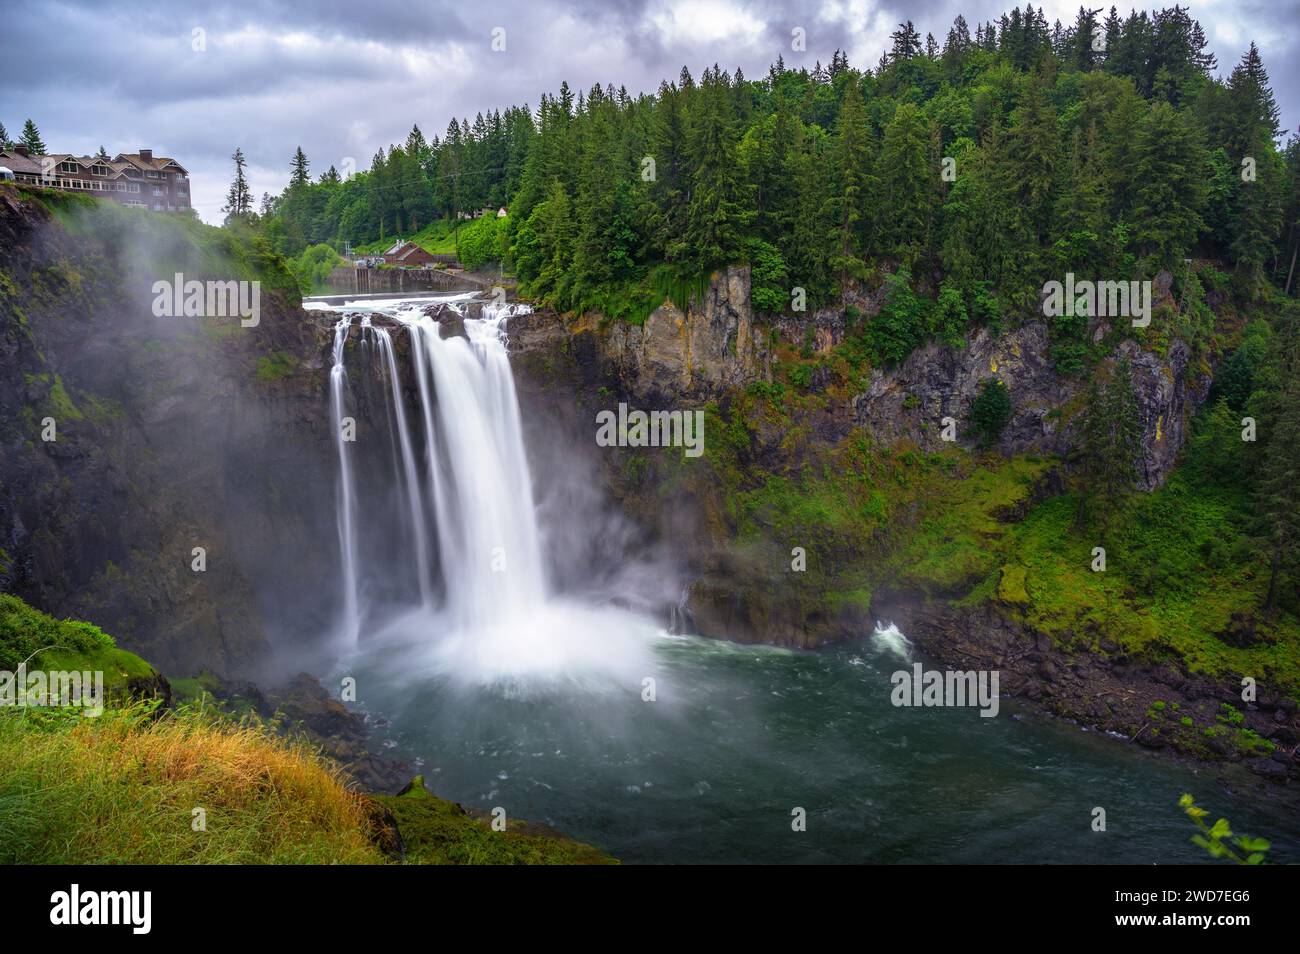 Snoqualmie Falls with lush greenery and mist in Washington State, USA Stock Photo